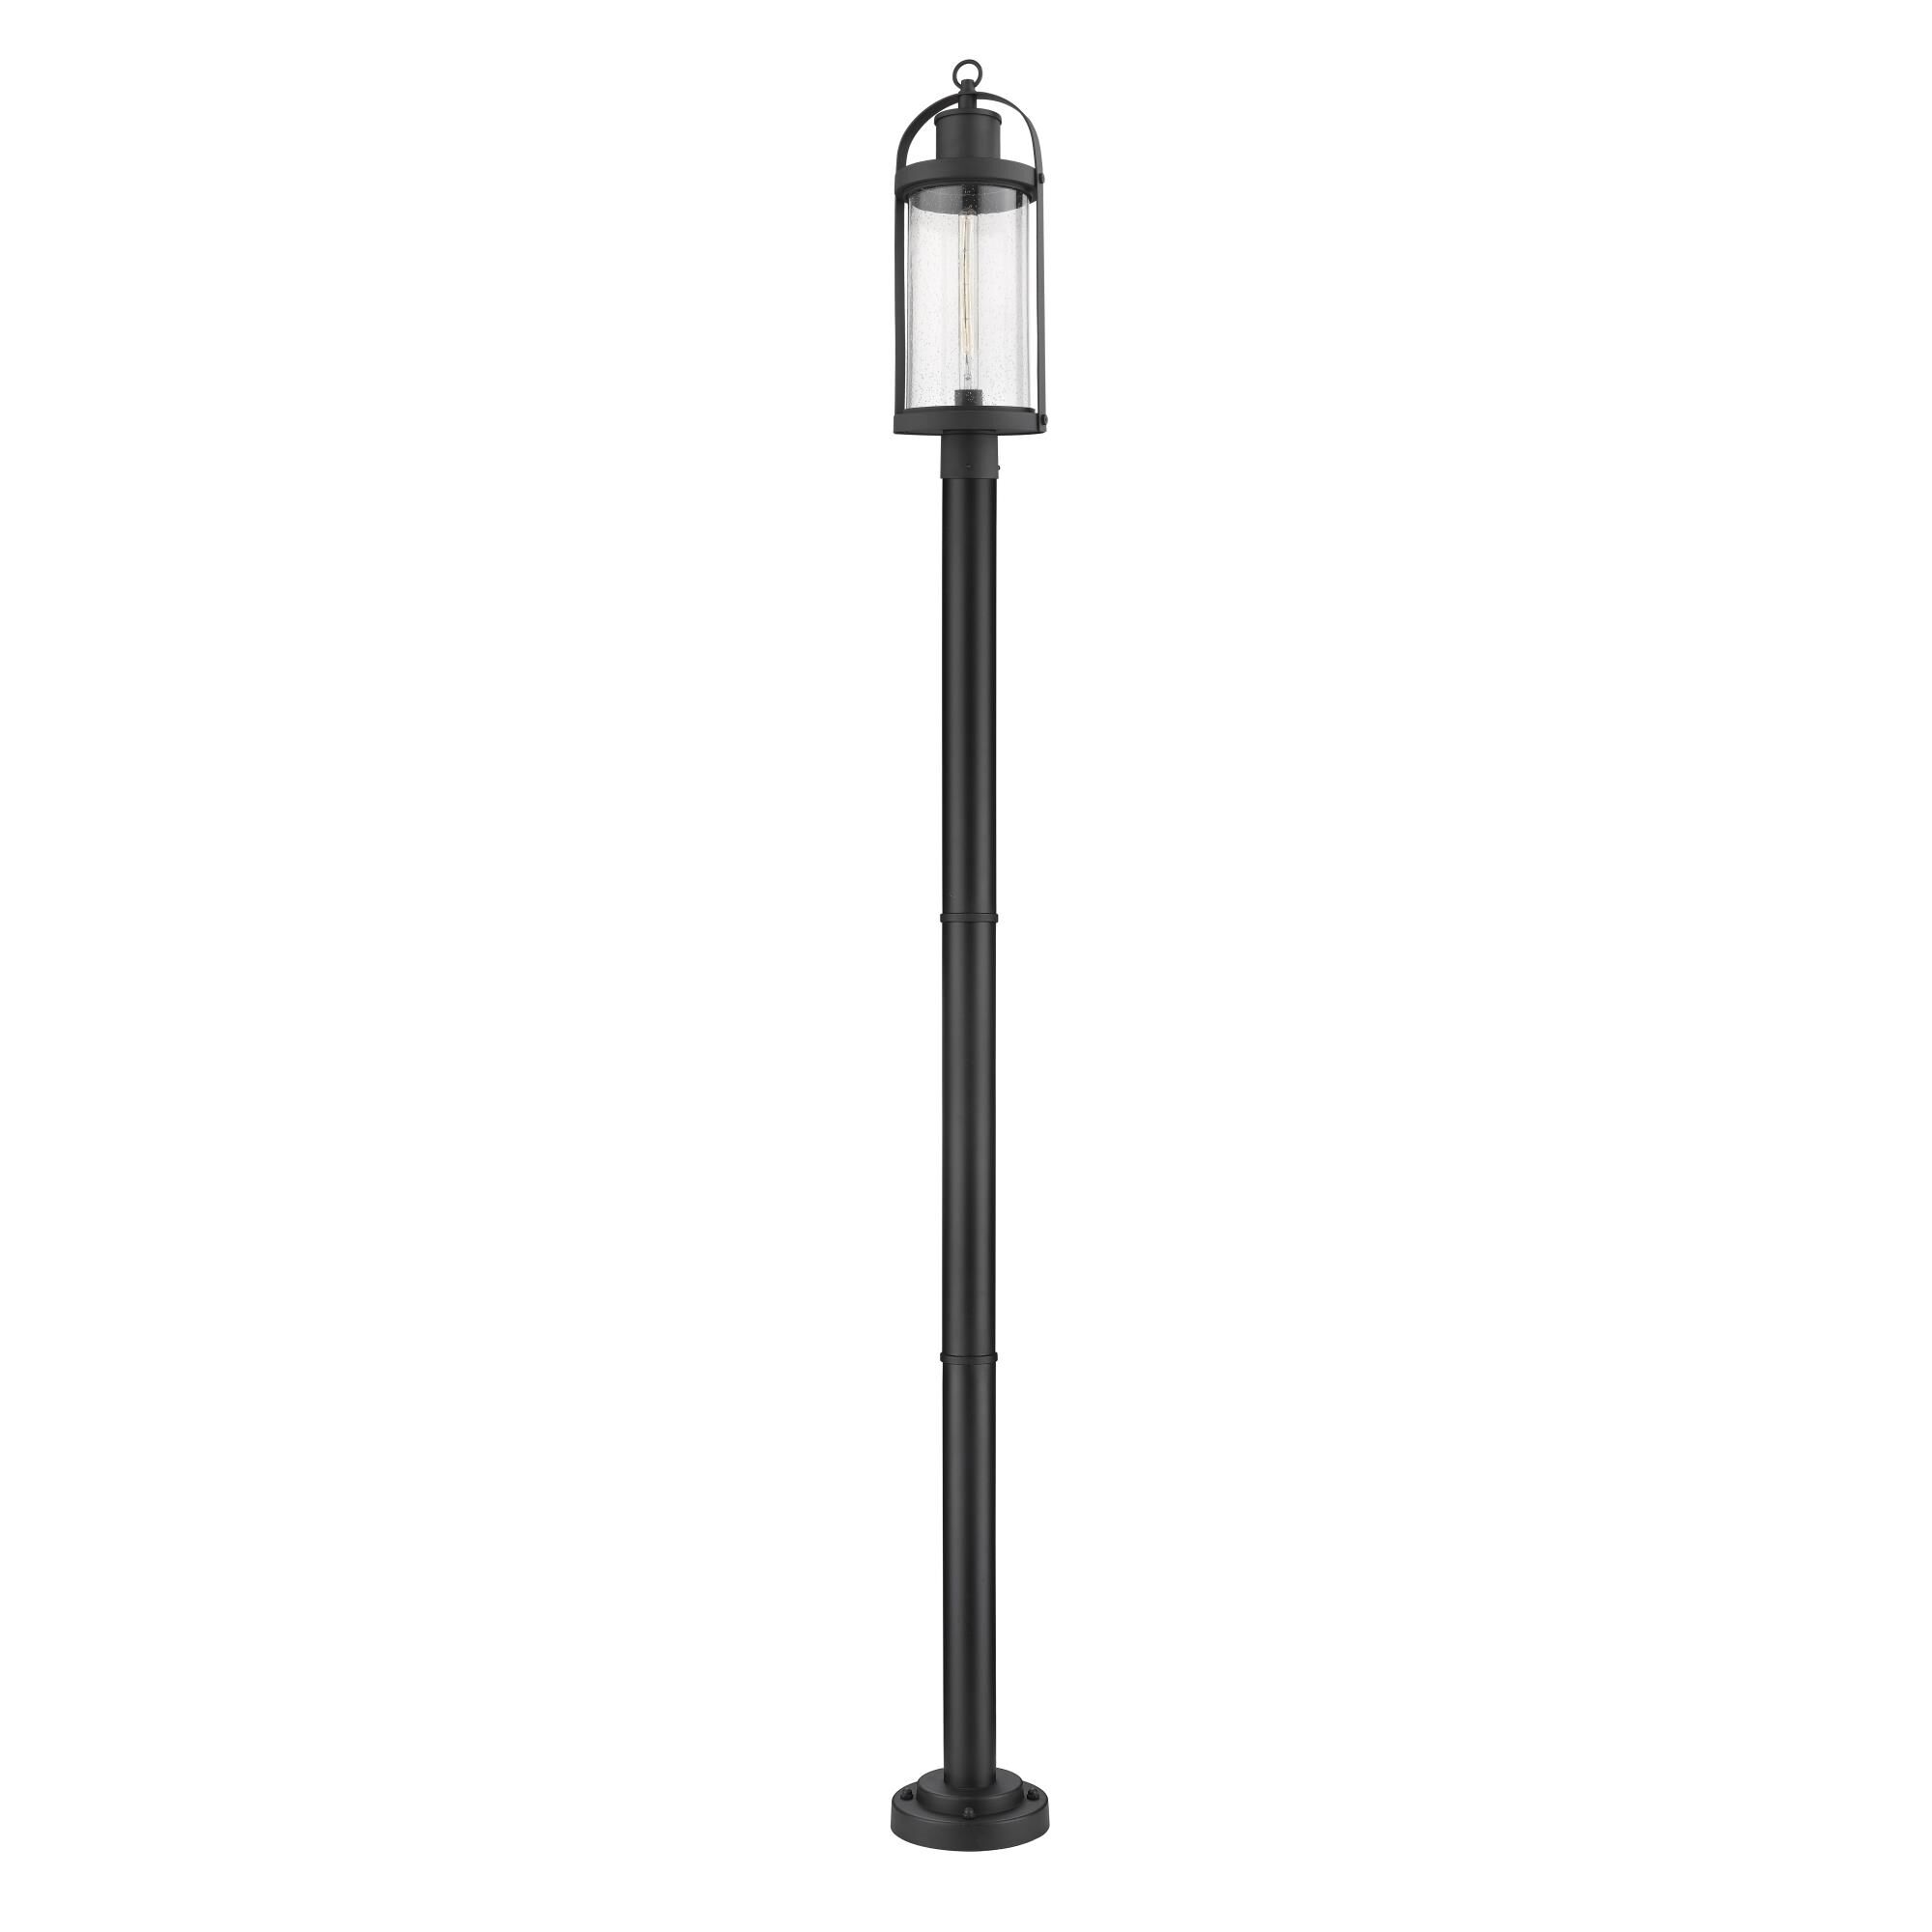 Photos - Floodlight / Street Light Z-Lite Roundhouse 98 Inch Tall Outdoor Post Lamp Roundhouse - 569PHB-567P